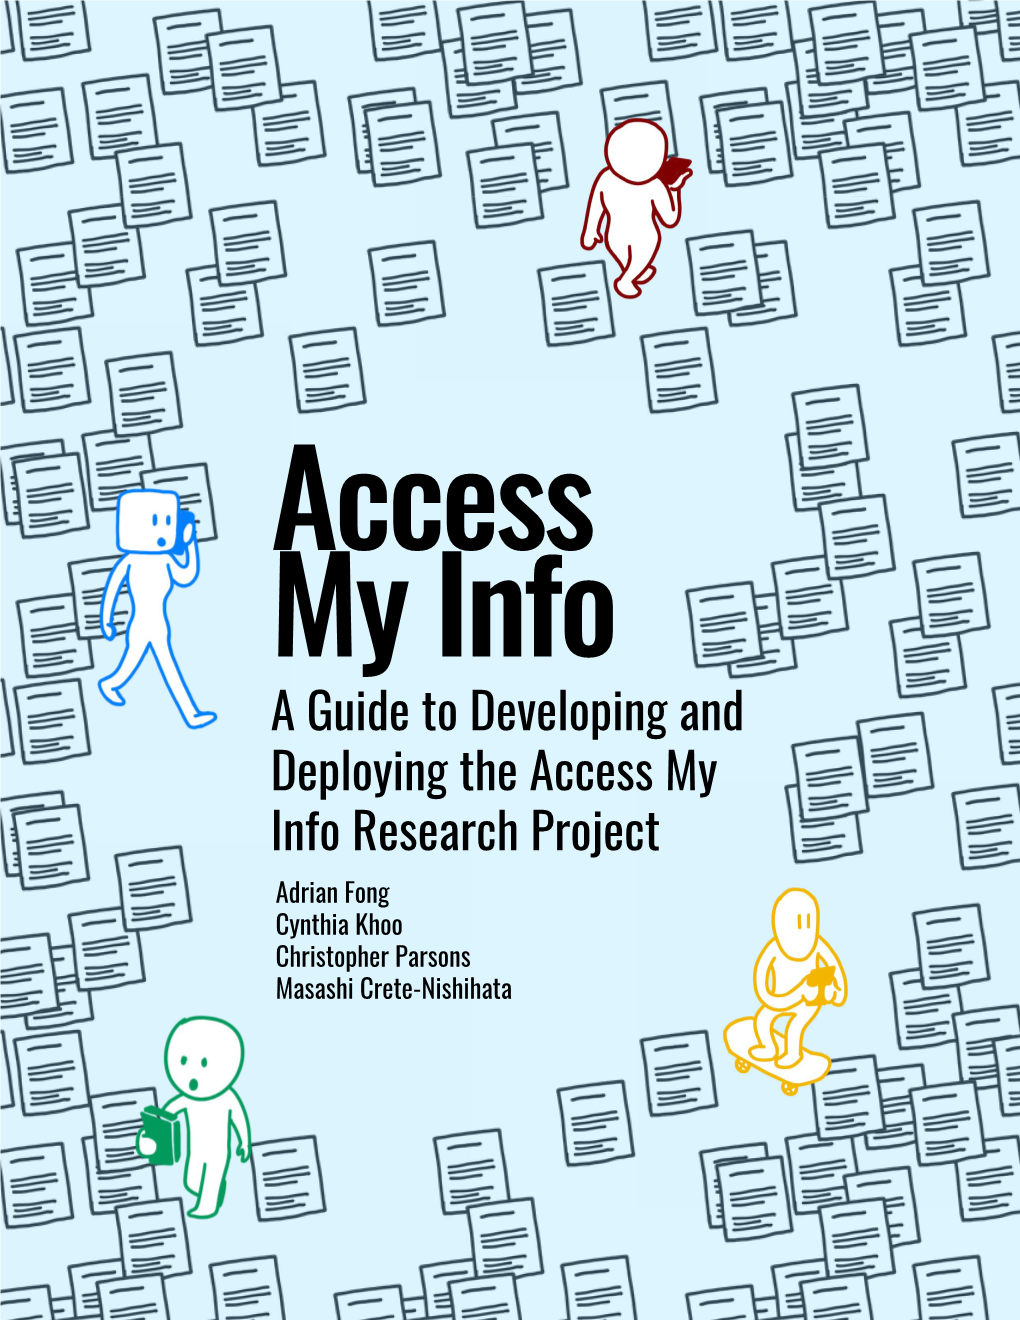 A Guide to Developing and Deploying the Access My Info Research Project